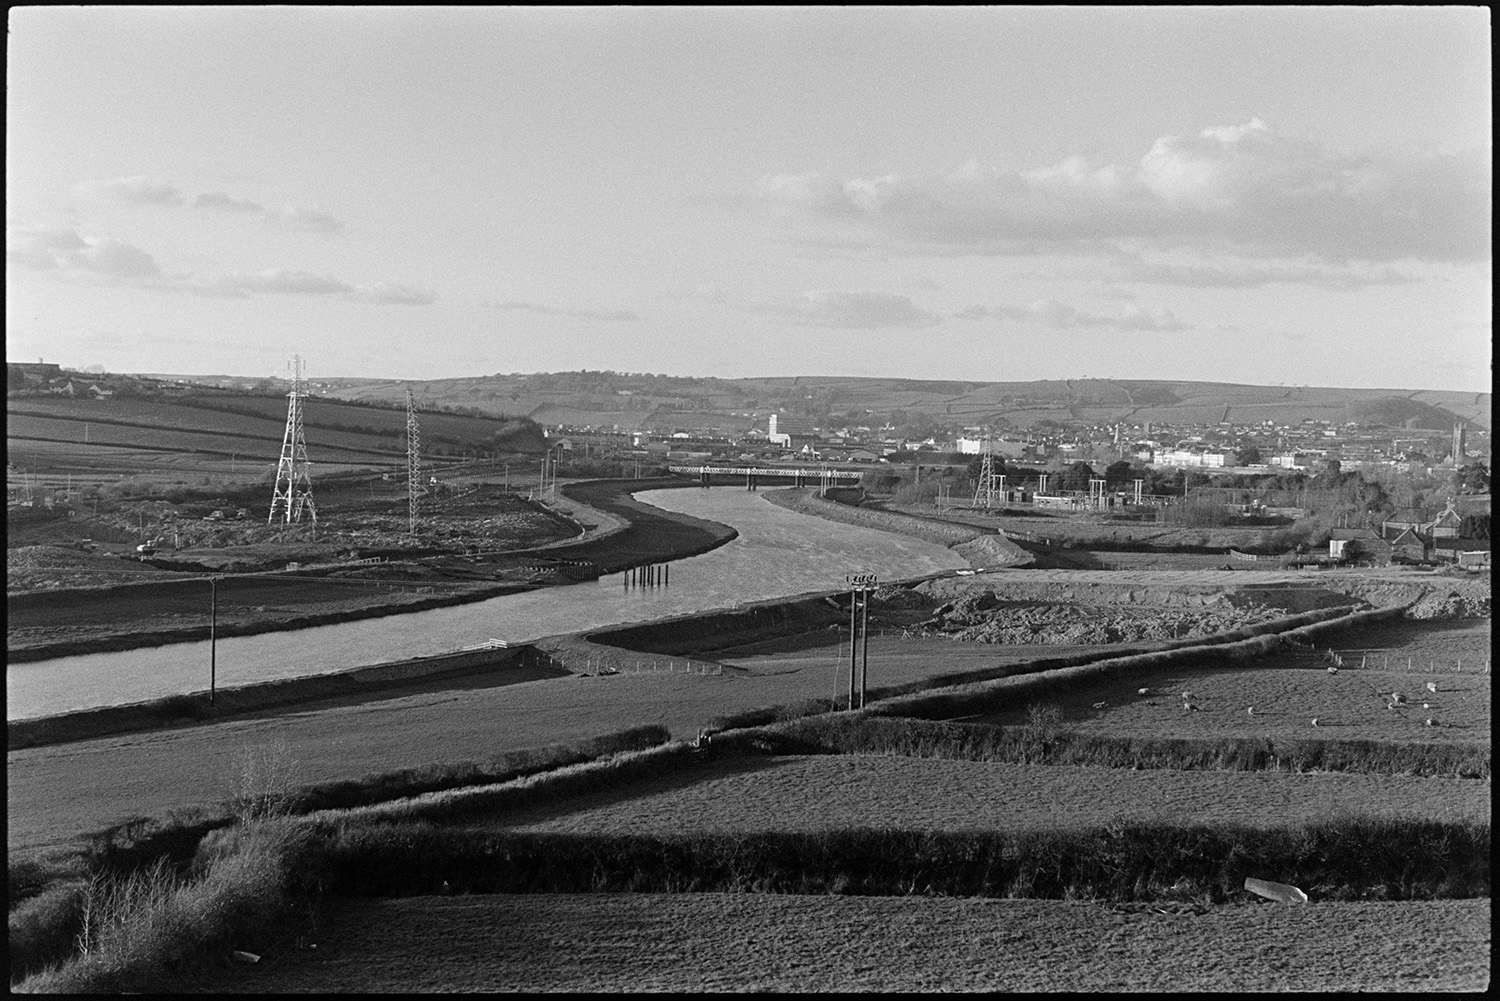 Engineers working on new river bridge for motorway link road.
[Piles in the River Taw being used in the erection of a bridge across the river. The town of Barnstaple can be seen in the background and electricity pylons are visible in the fields in the foreground.]